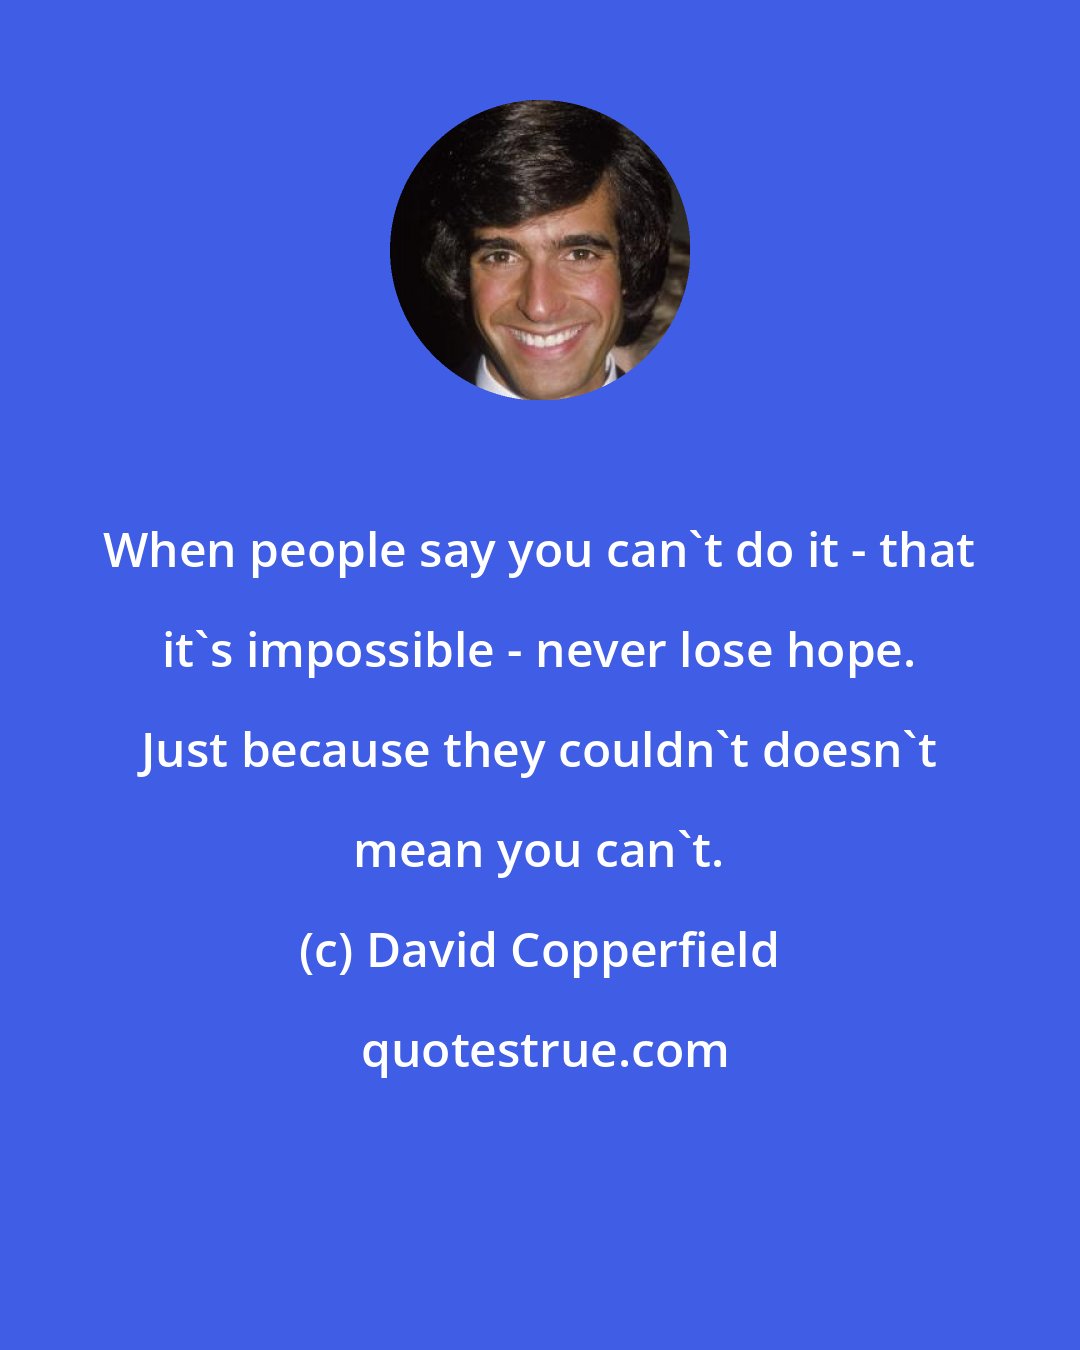 David Copperfield: When people say you can't do it - that it's impossible - never lose hope. Just because they couldn't doesn't mean you can't.